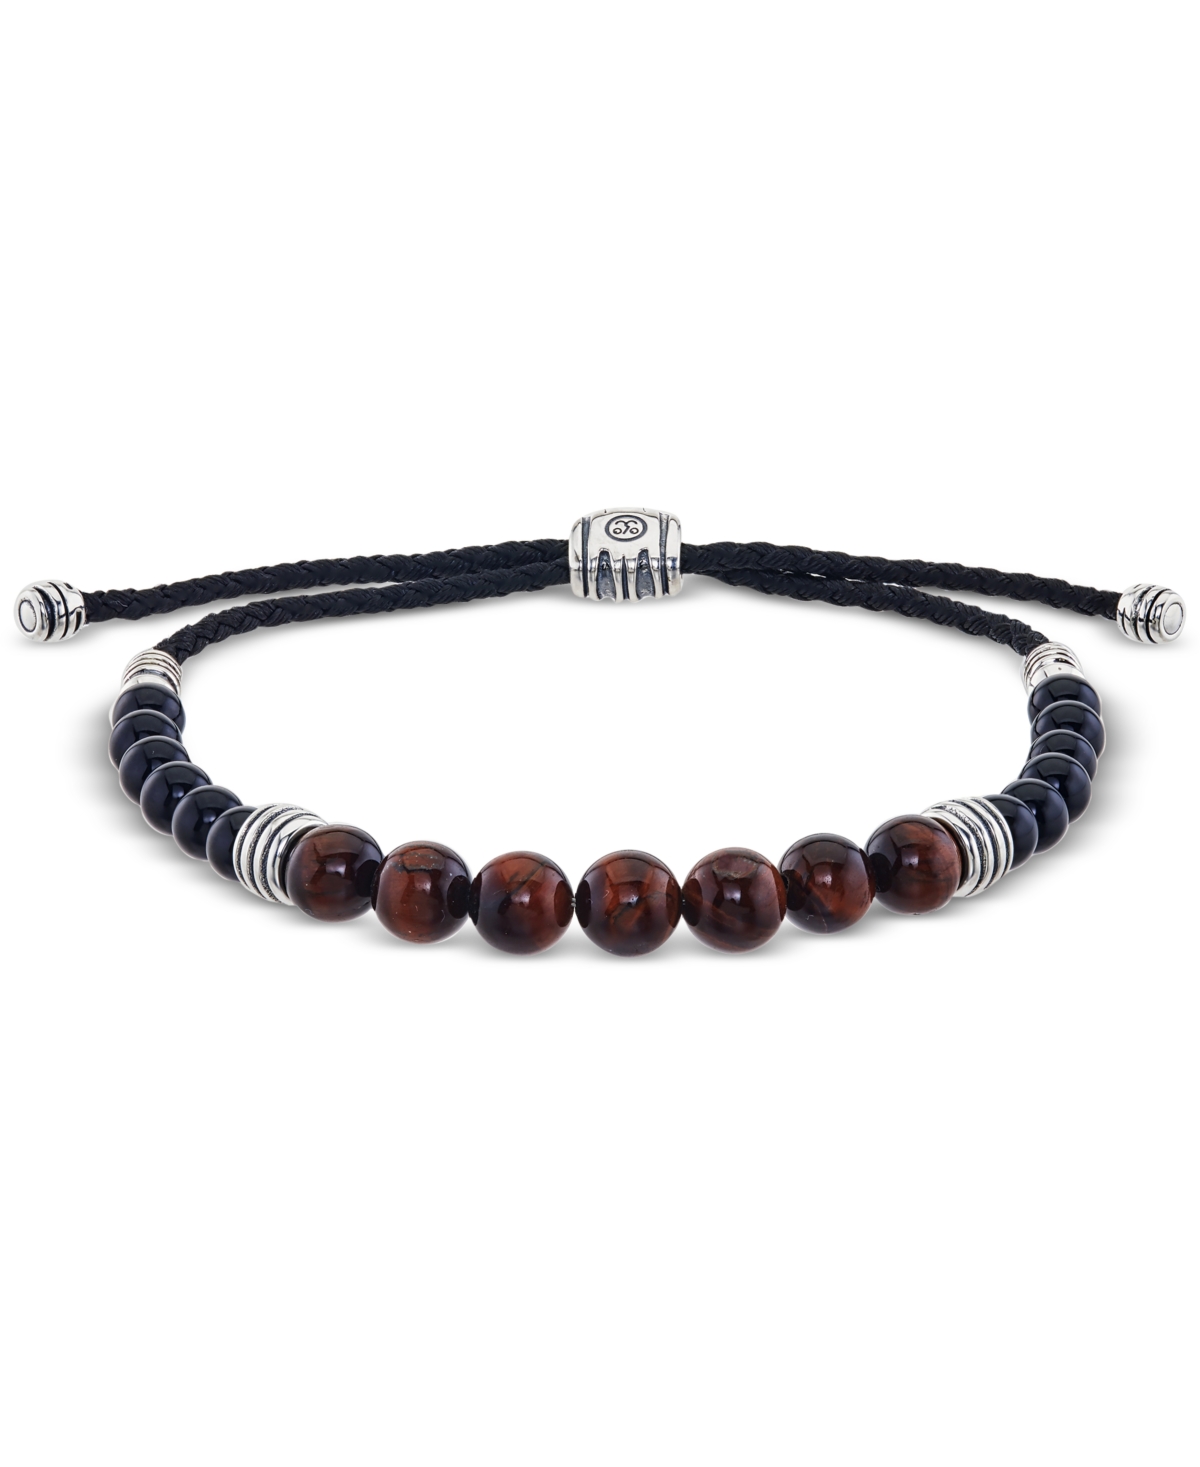 Tiger's Eye (8mm) and Onyx (6mm) Beaded Bolo Bracelet in Sterling Silver, Created for Macy's - Silver